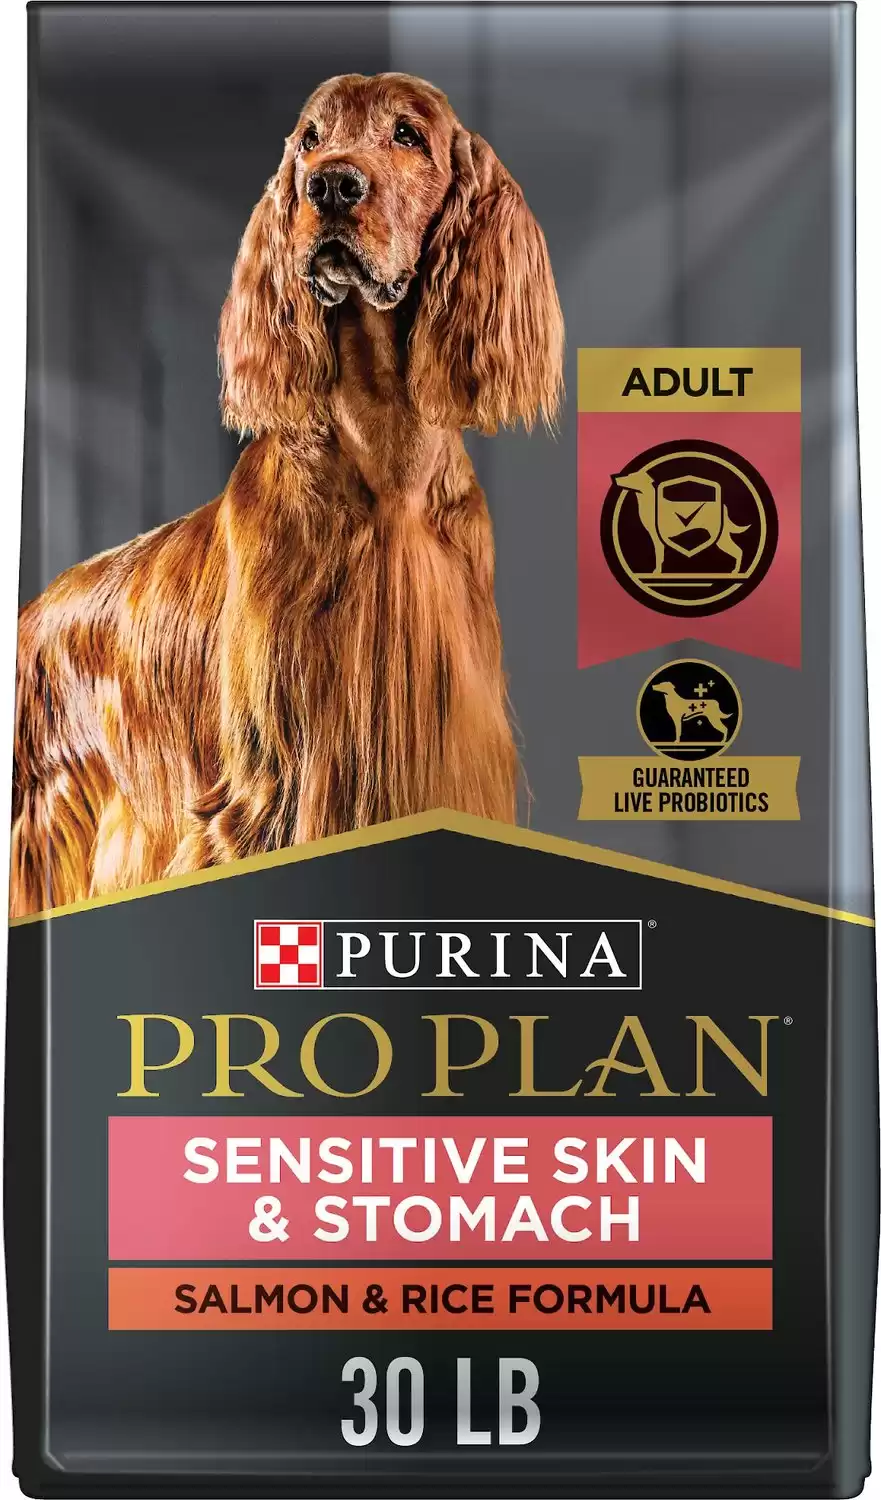 Purina Pro Plan Skin and Stomach High Protein Dog Food